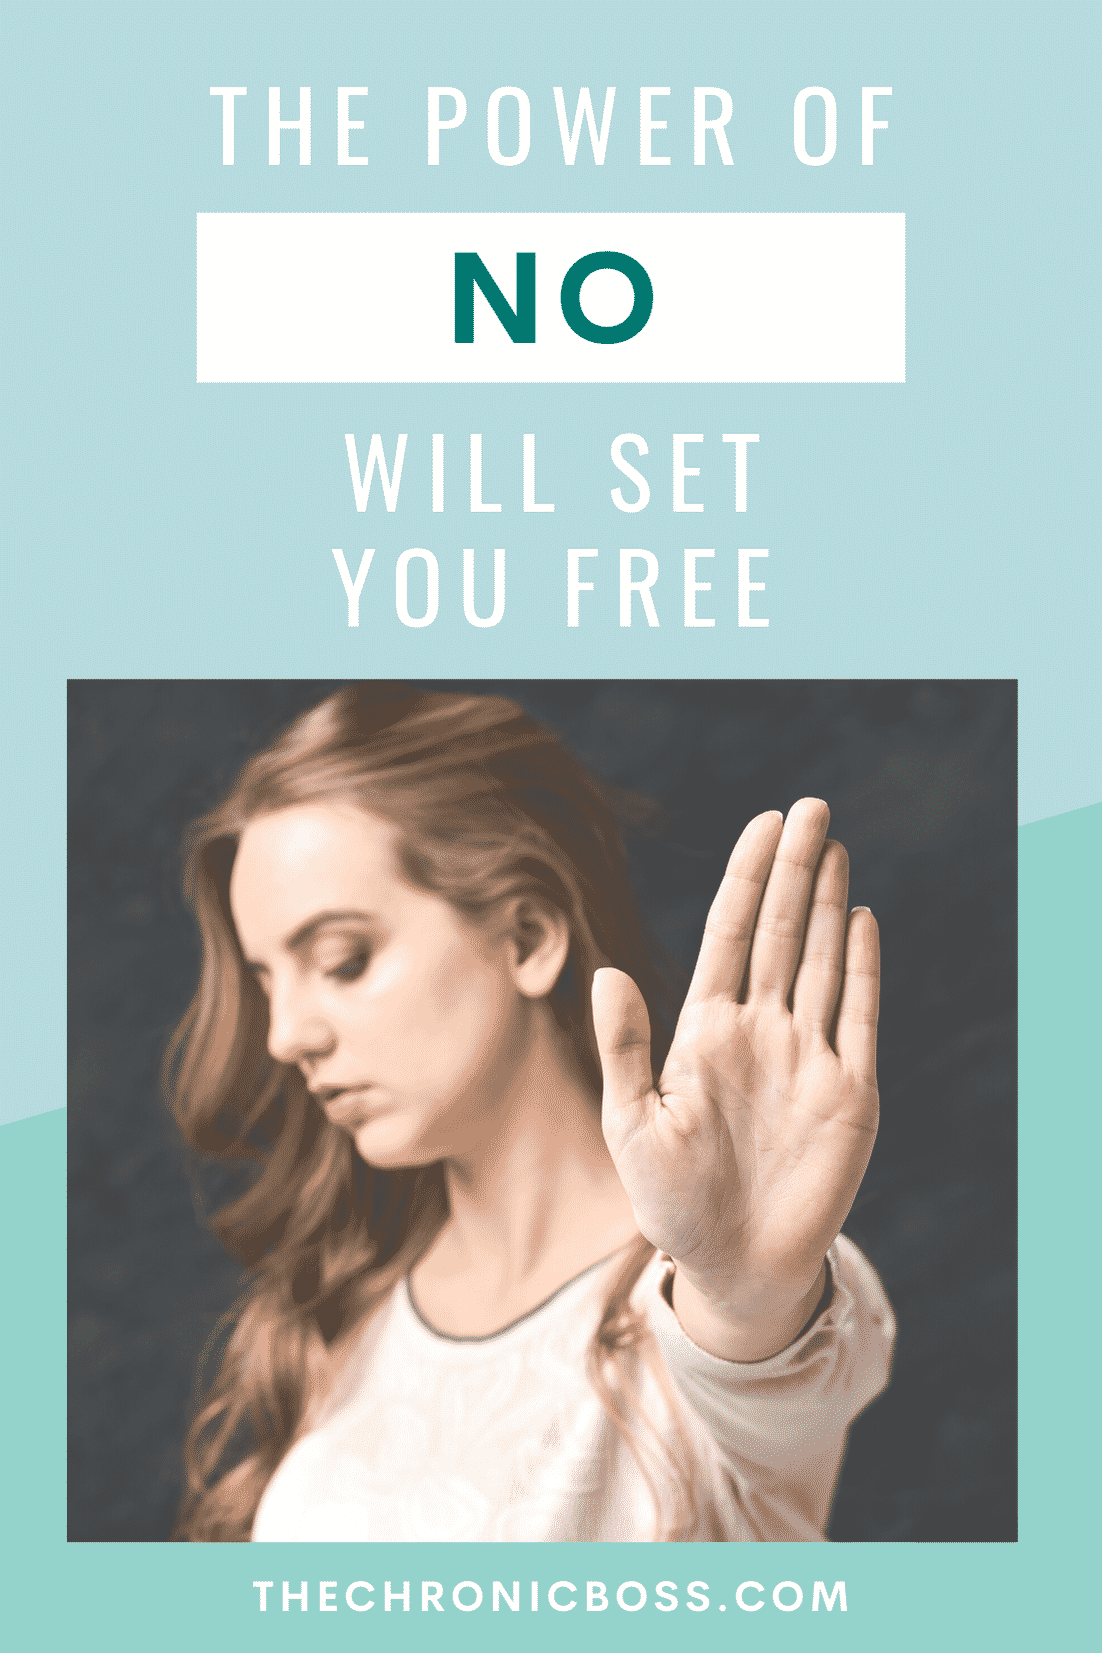 The Power of No Will Set You Free